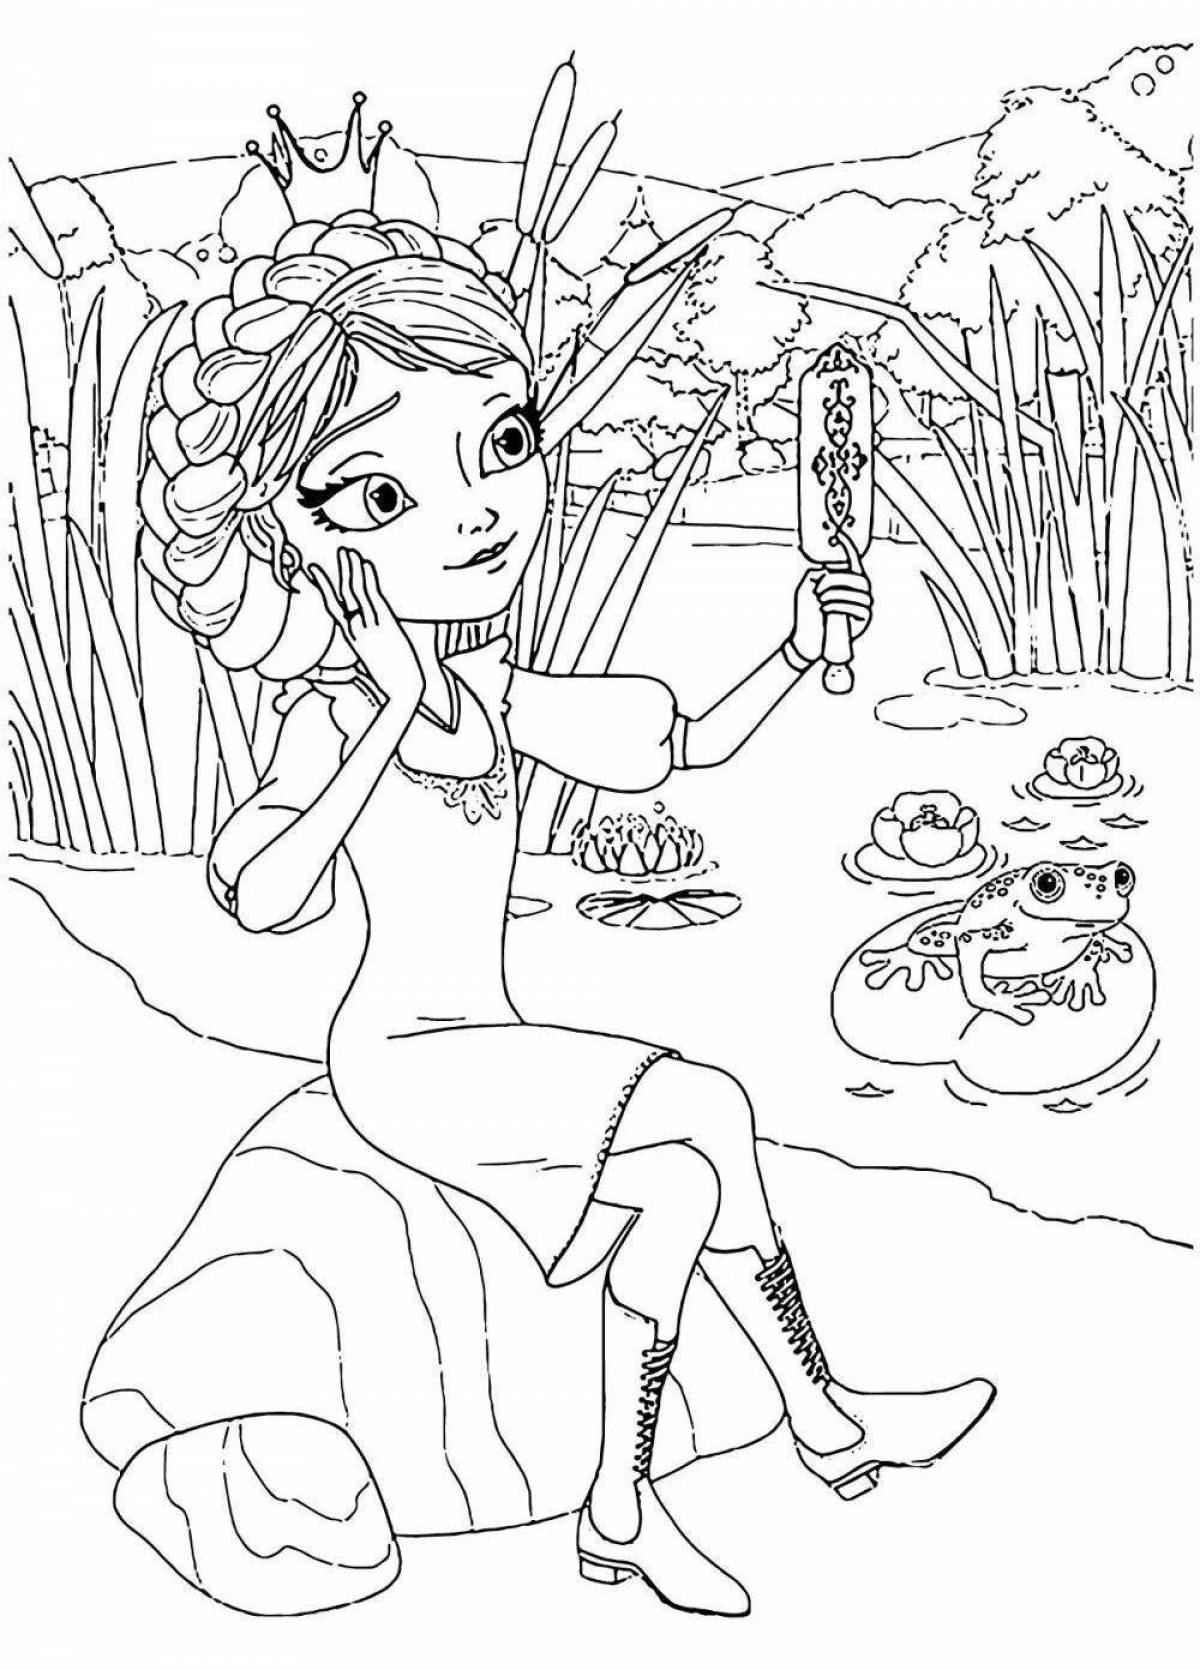 Holiday princesses are preparing coloring pages